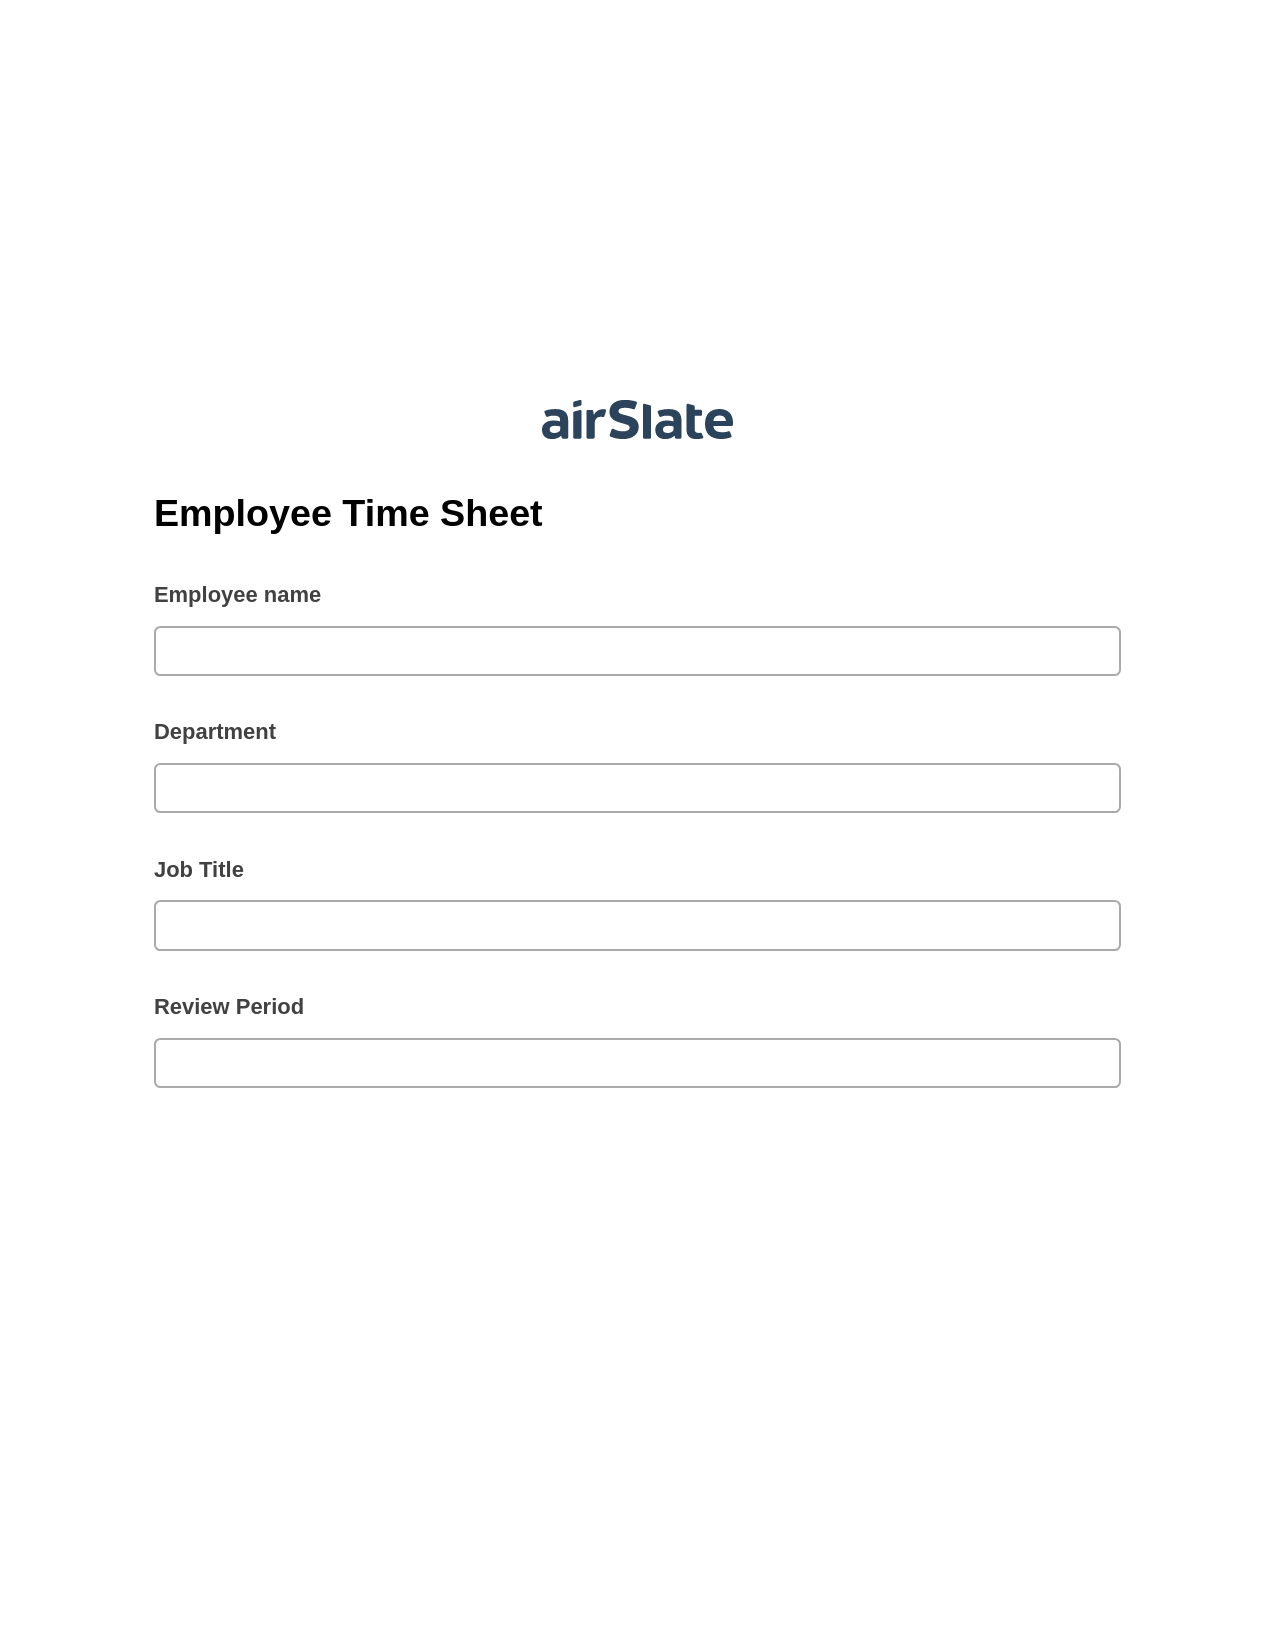 Employee Time Sheet Pre-fill Dropdowns from Airtable, Create Salesforce Records Bot, Archive to Box Bot